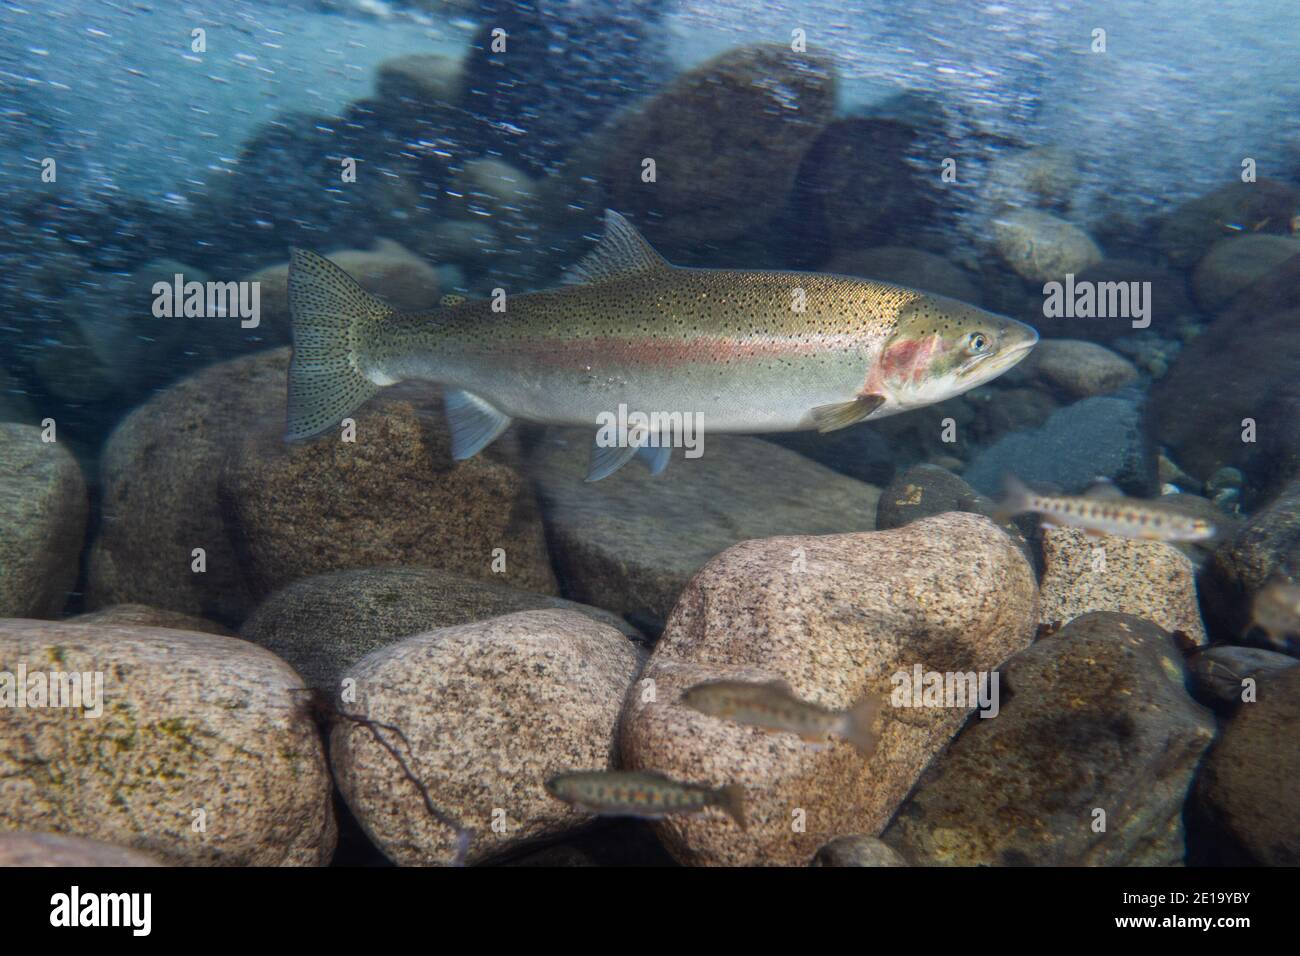 Steelhead trout displaying spawning colors. Stock Photo